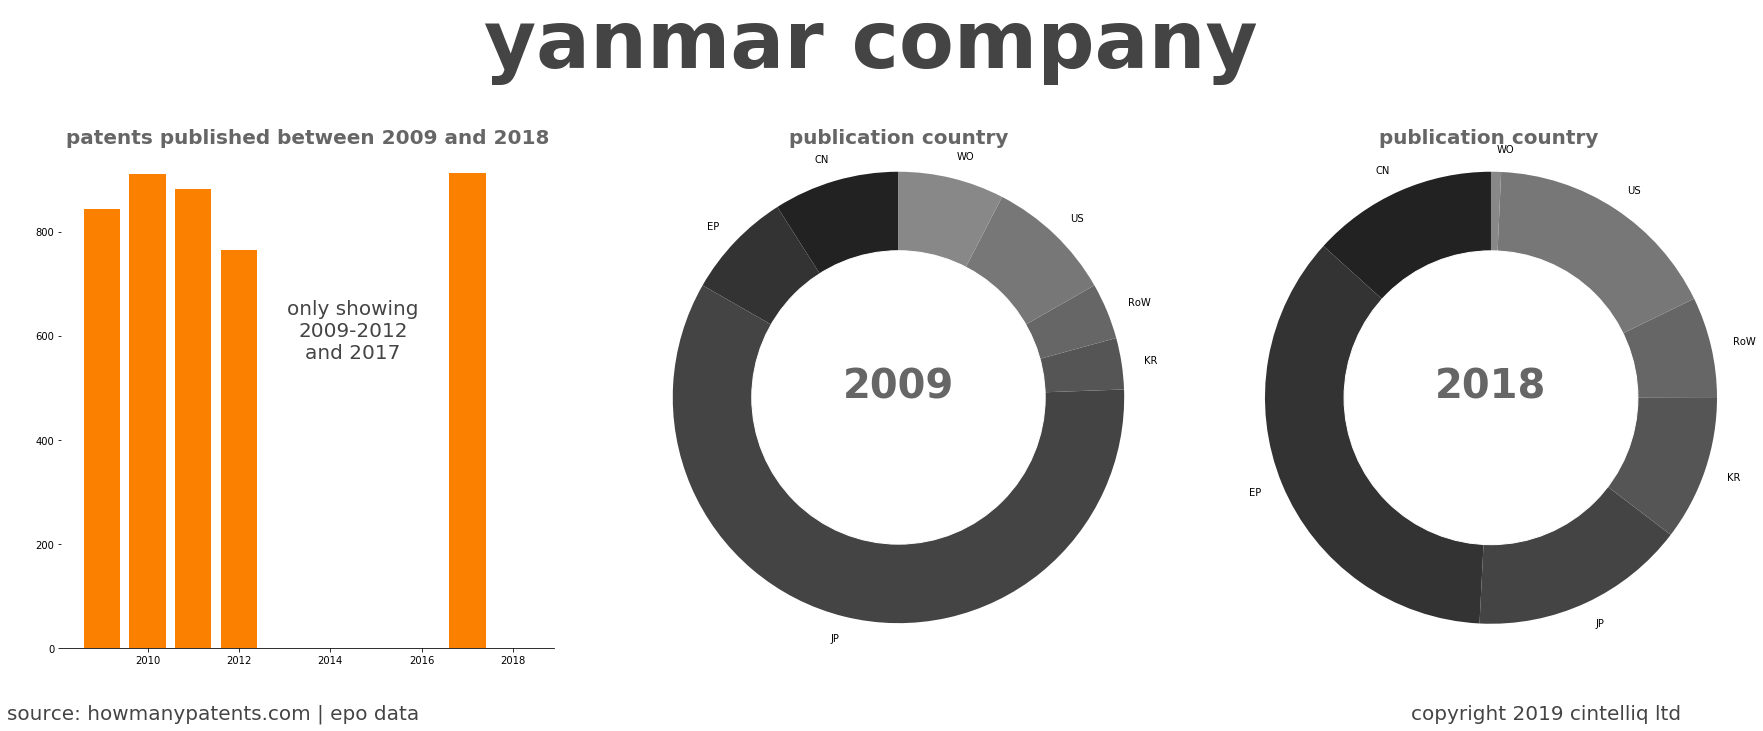 summary of patents for Yanmar Company